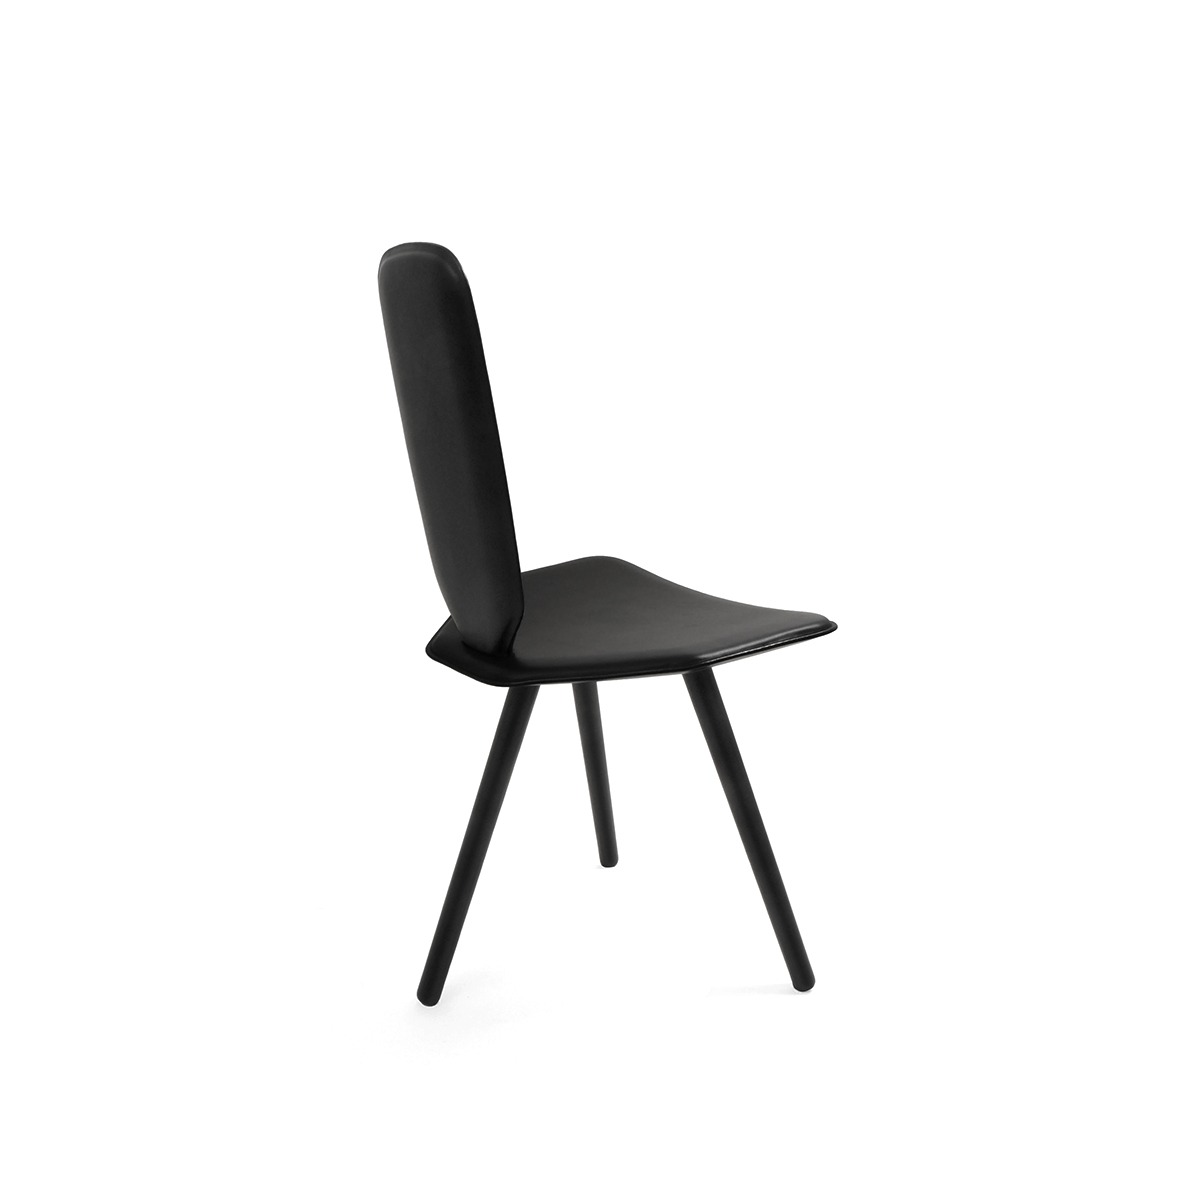 DANTE - Goods and Bads Bavaresk High Dining Chair - Leather